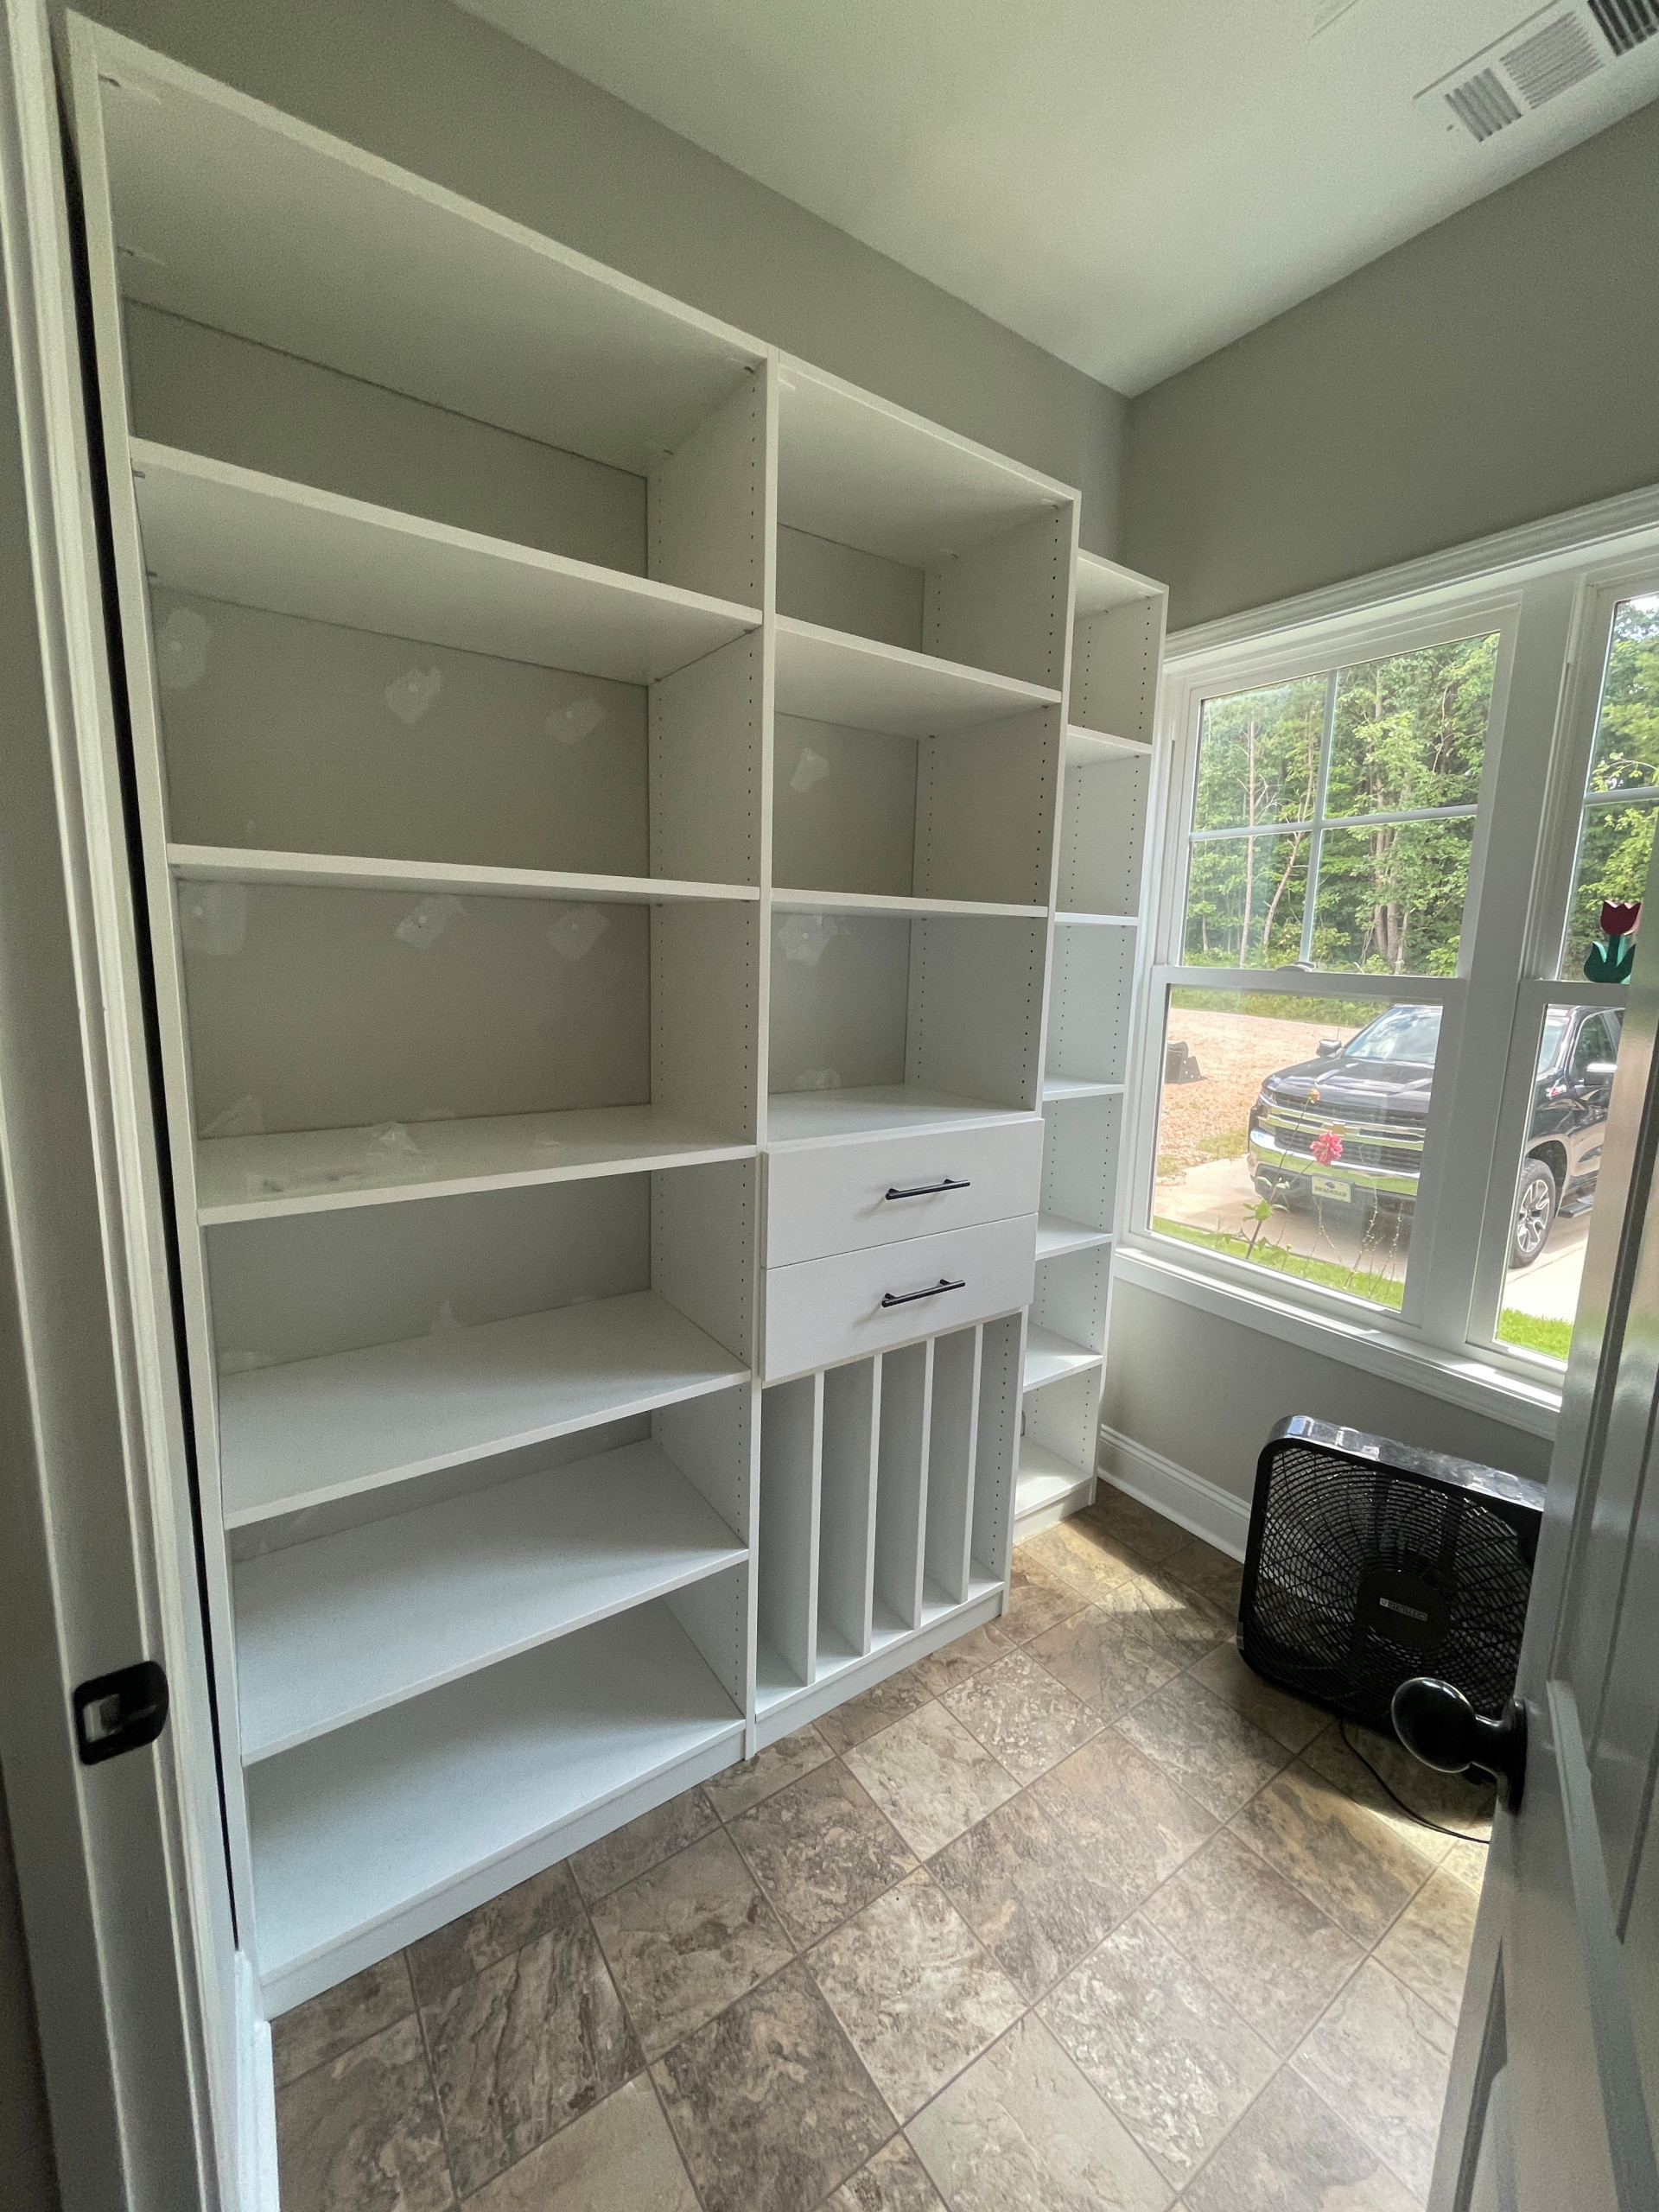 Pantry with Vertical Shelving, Drawers, and Adjustable Open Shelving